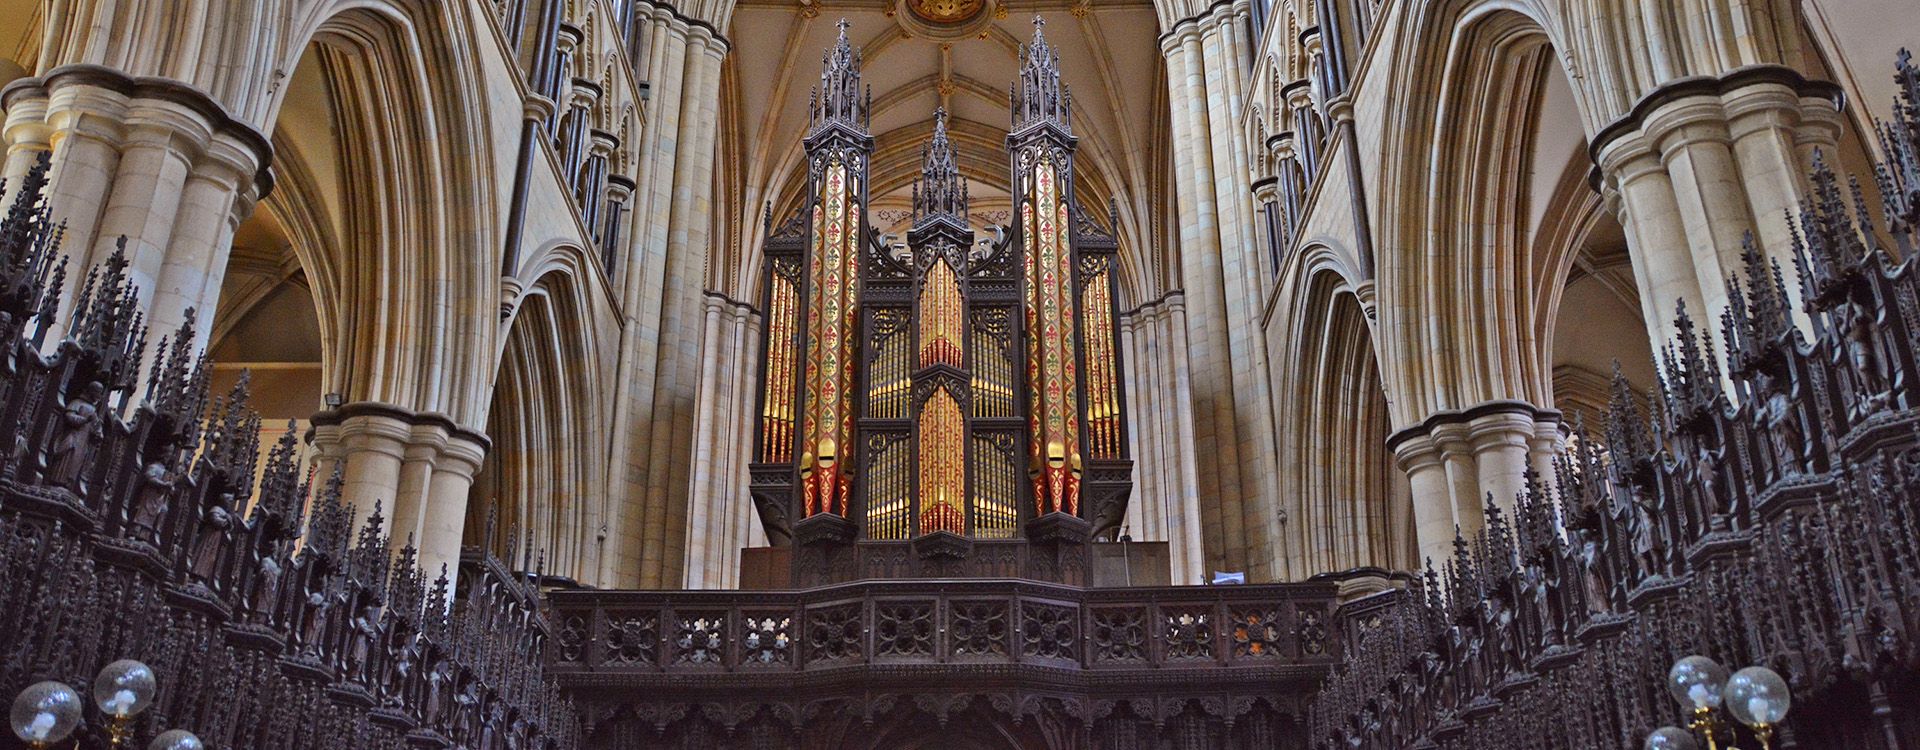 A view of the organ, looking west from Beverley Minster's Choir.